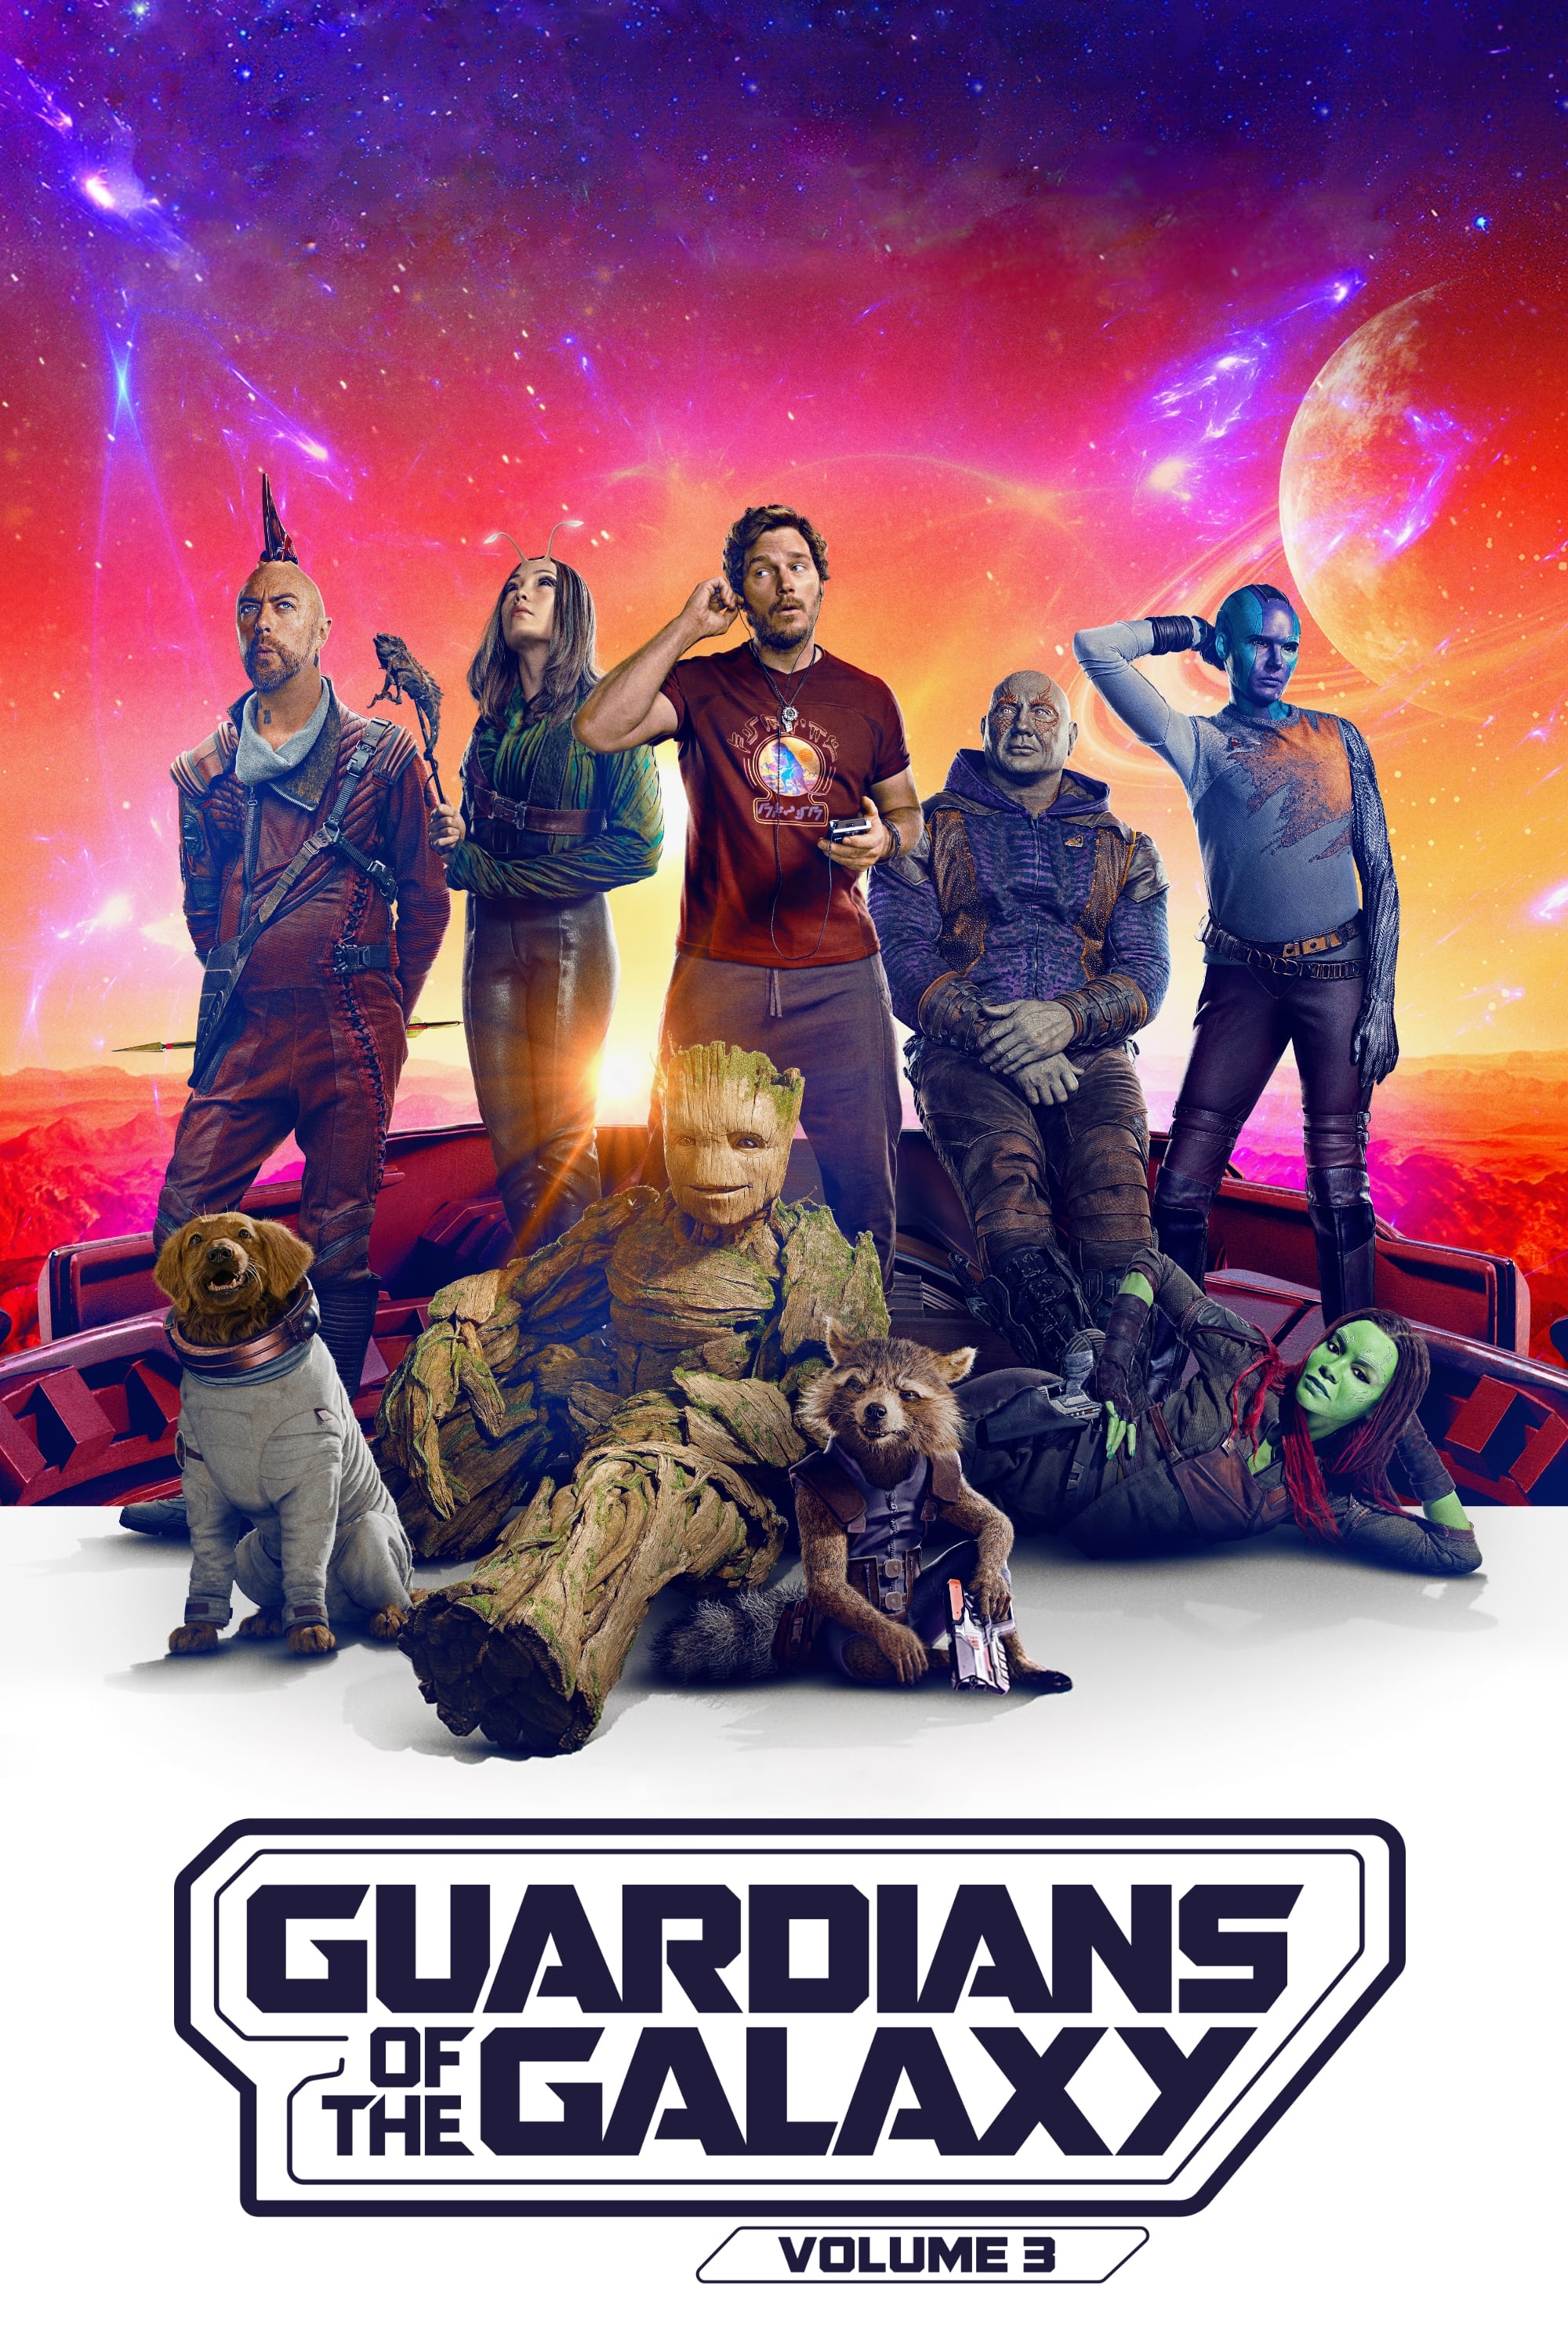 Guardians of the Galaxy Vol. 3 Streaming Online